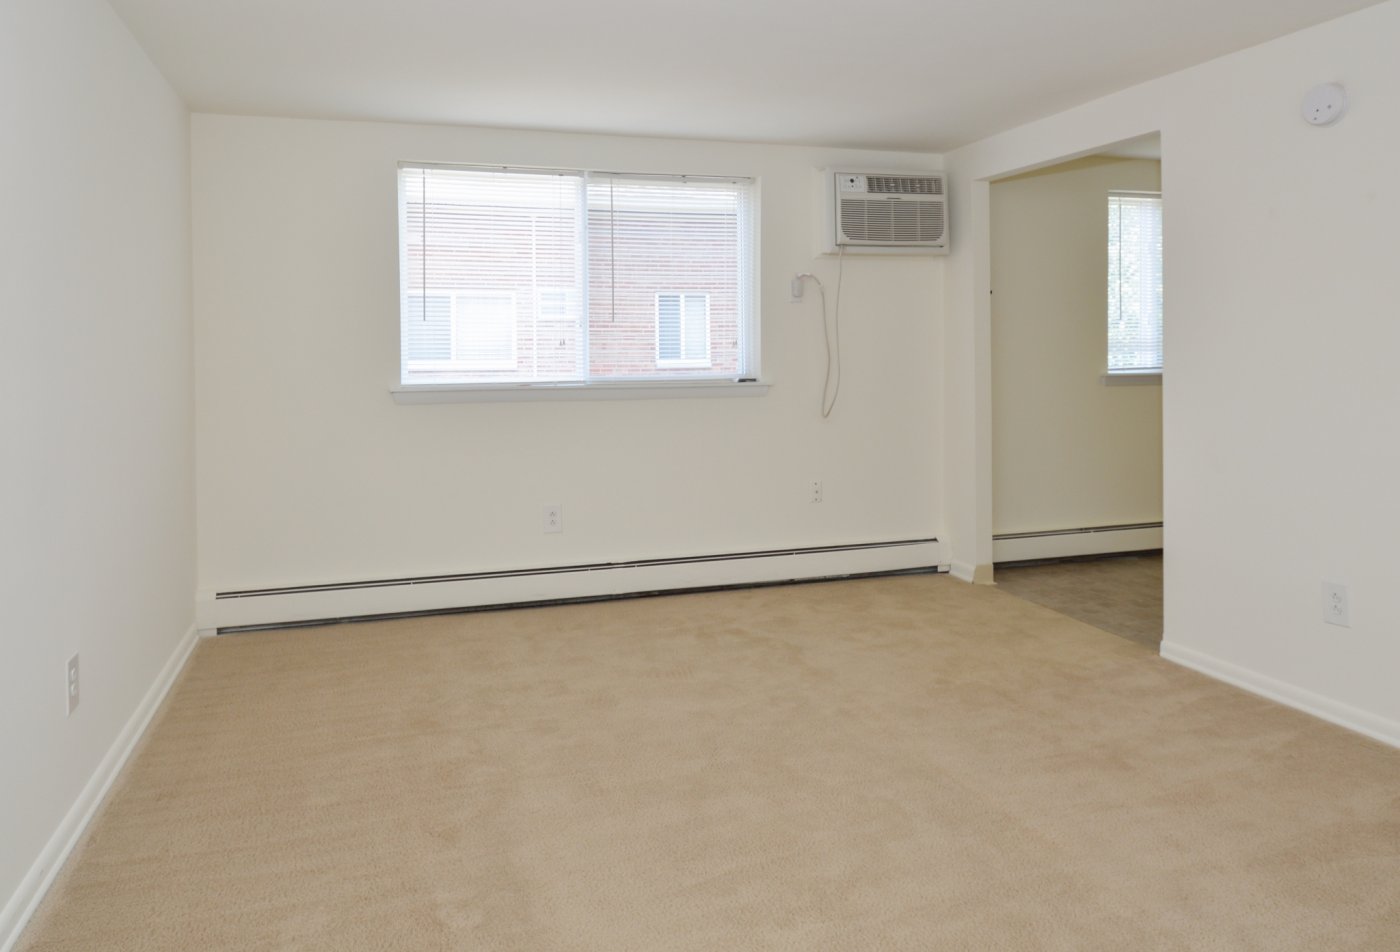 Spacious Living Room | Apartments in Boothwyn, PA | Boothwyn Court Apartments